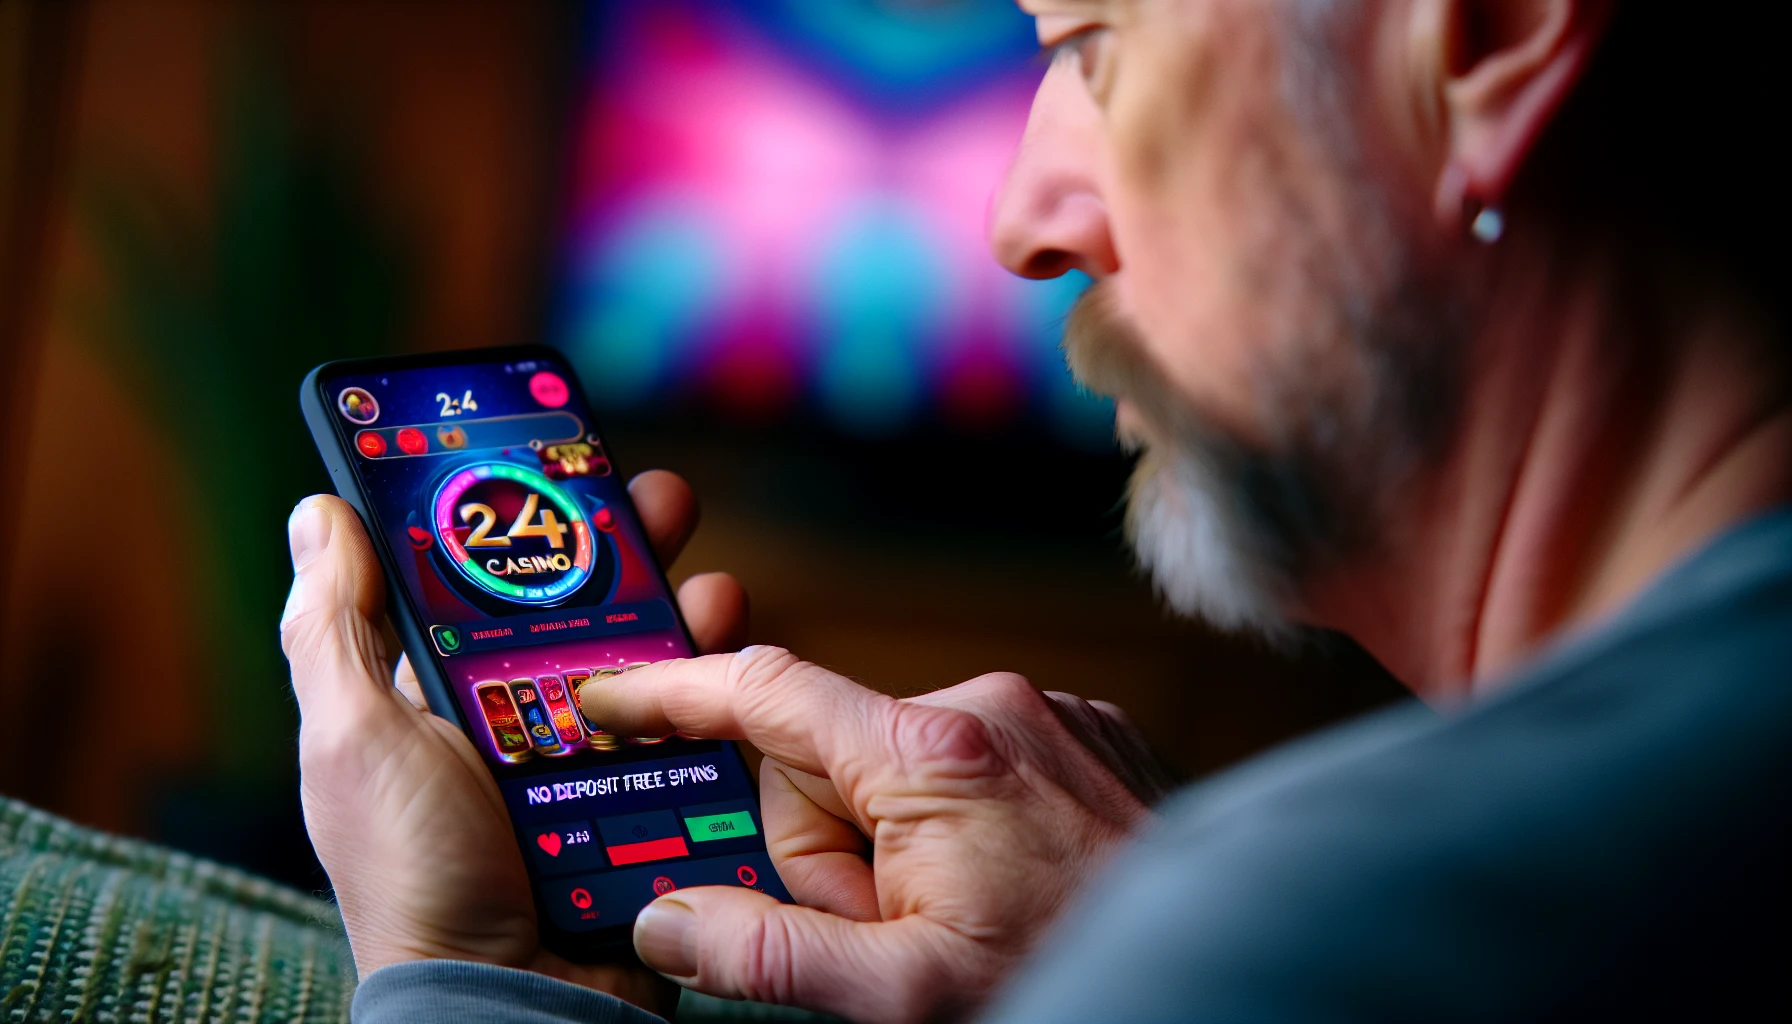 Photo of a person claiming no deposit free spins on a mobile device at 24 Casino